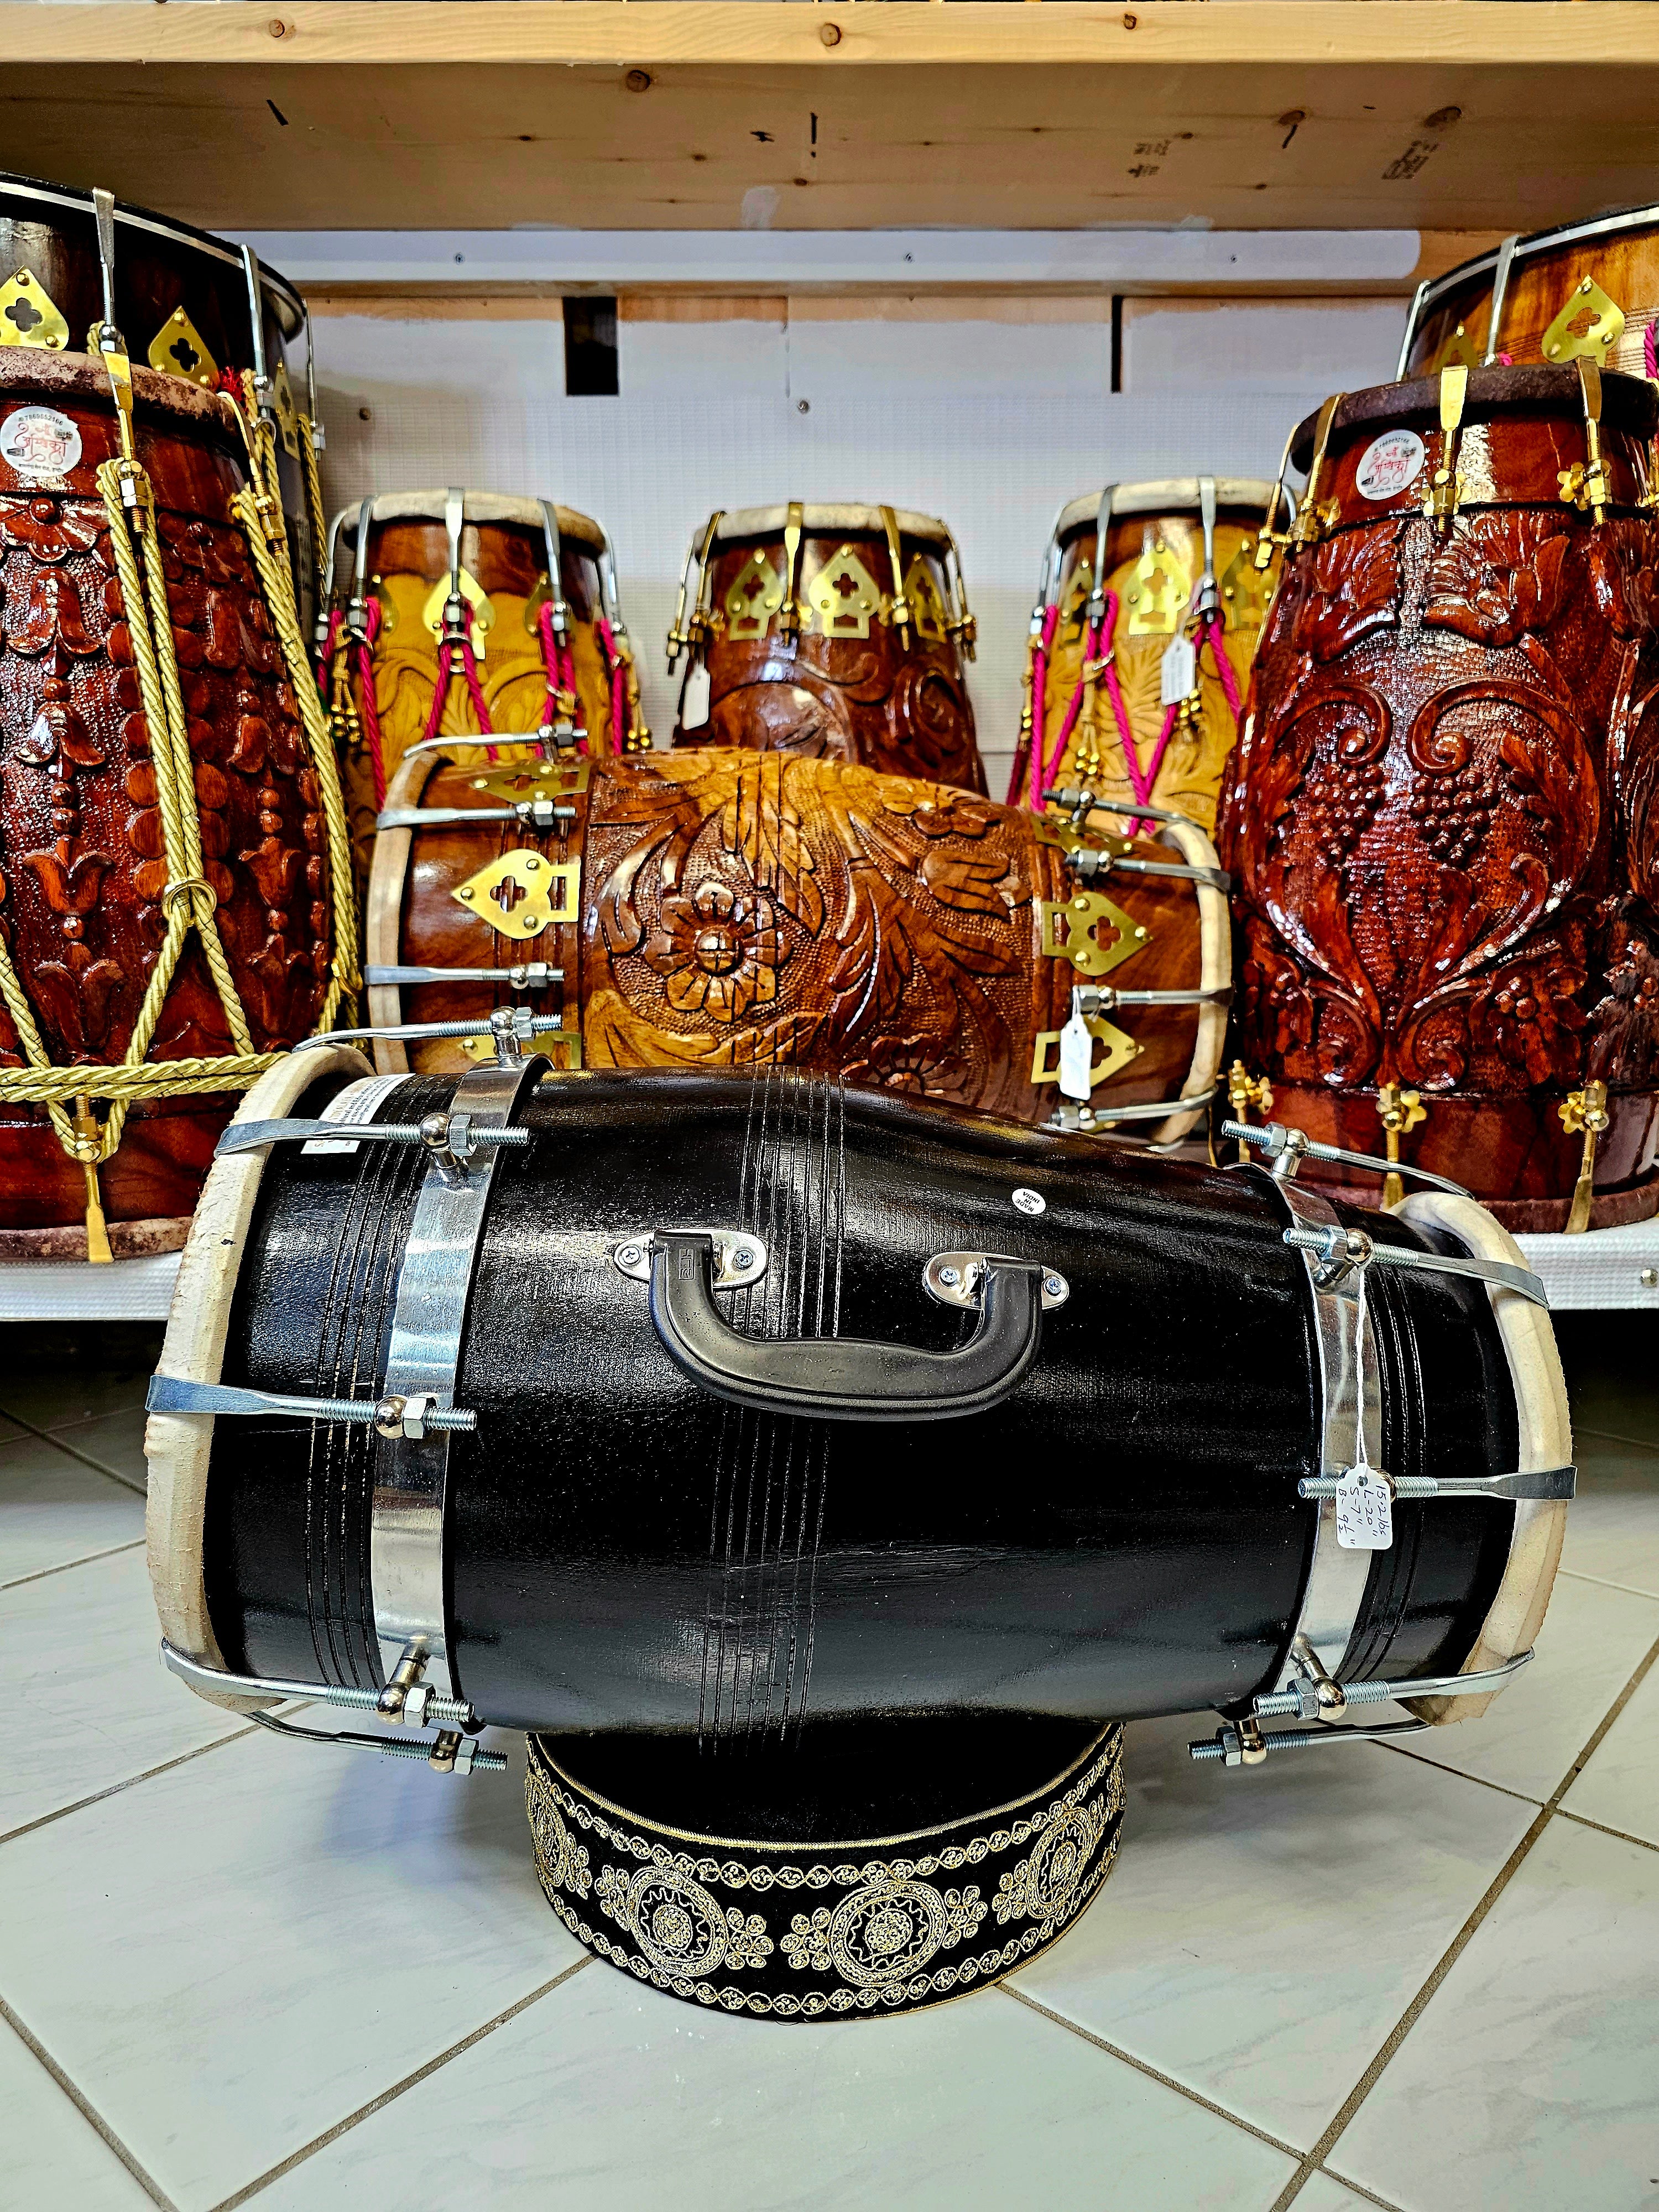 The Onyx Sonic Dholak - A Black Professional Mango Wood Dholak with Chrome Bolts, Metal Rings and a Handle!